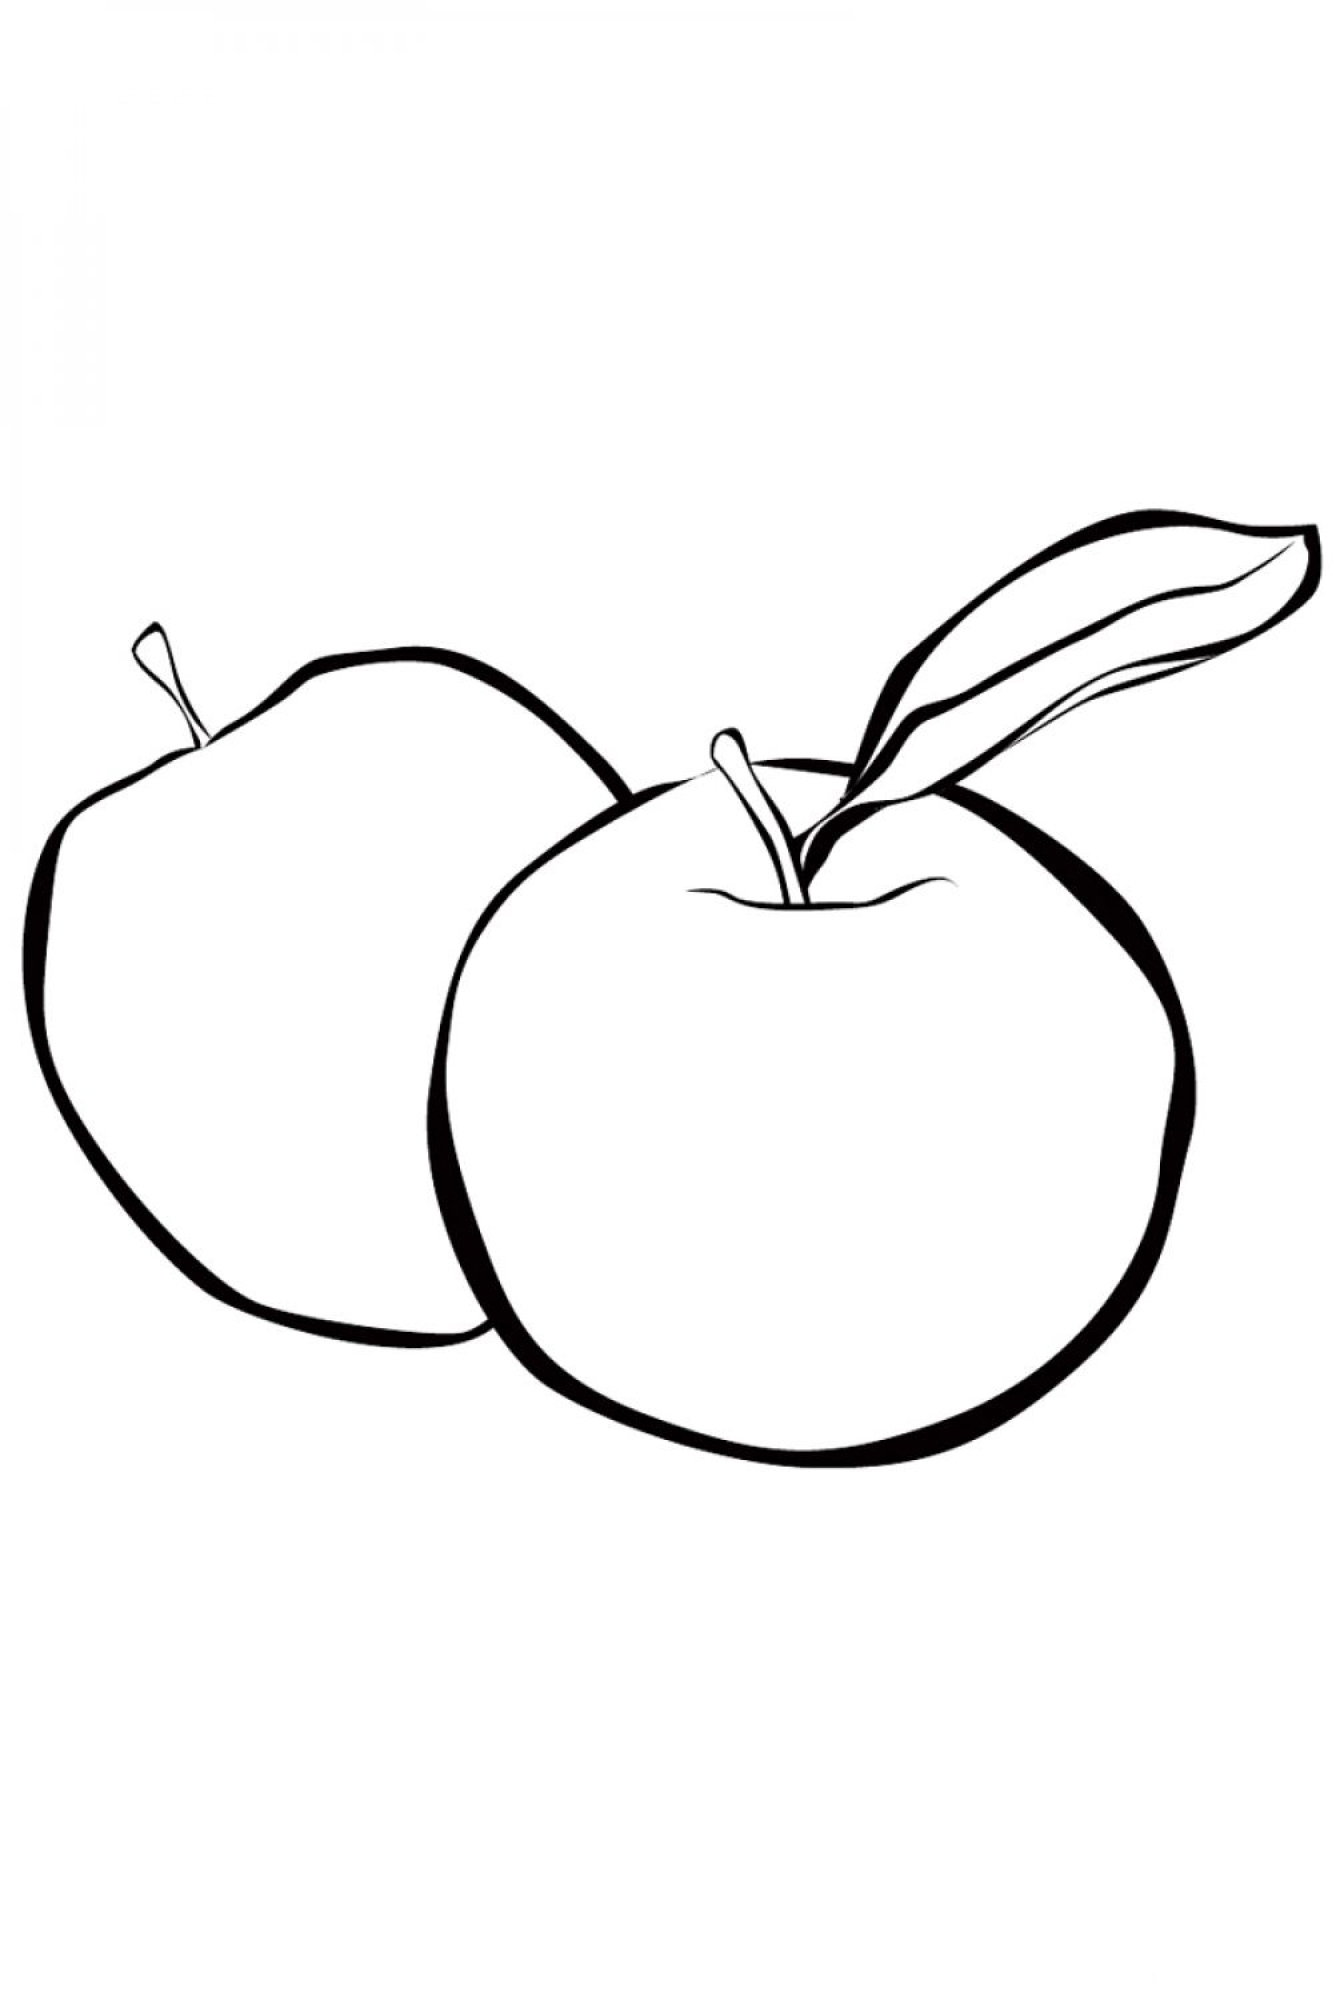 Coloring Pages berries and fruits for children. Print for free.